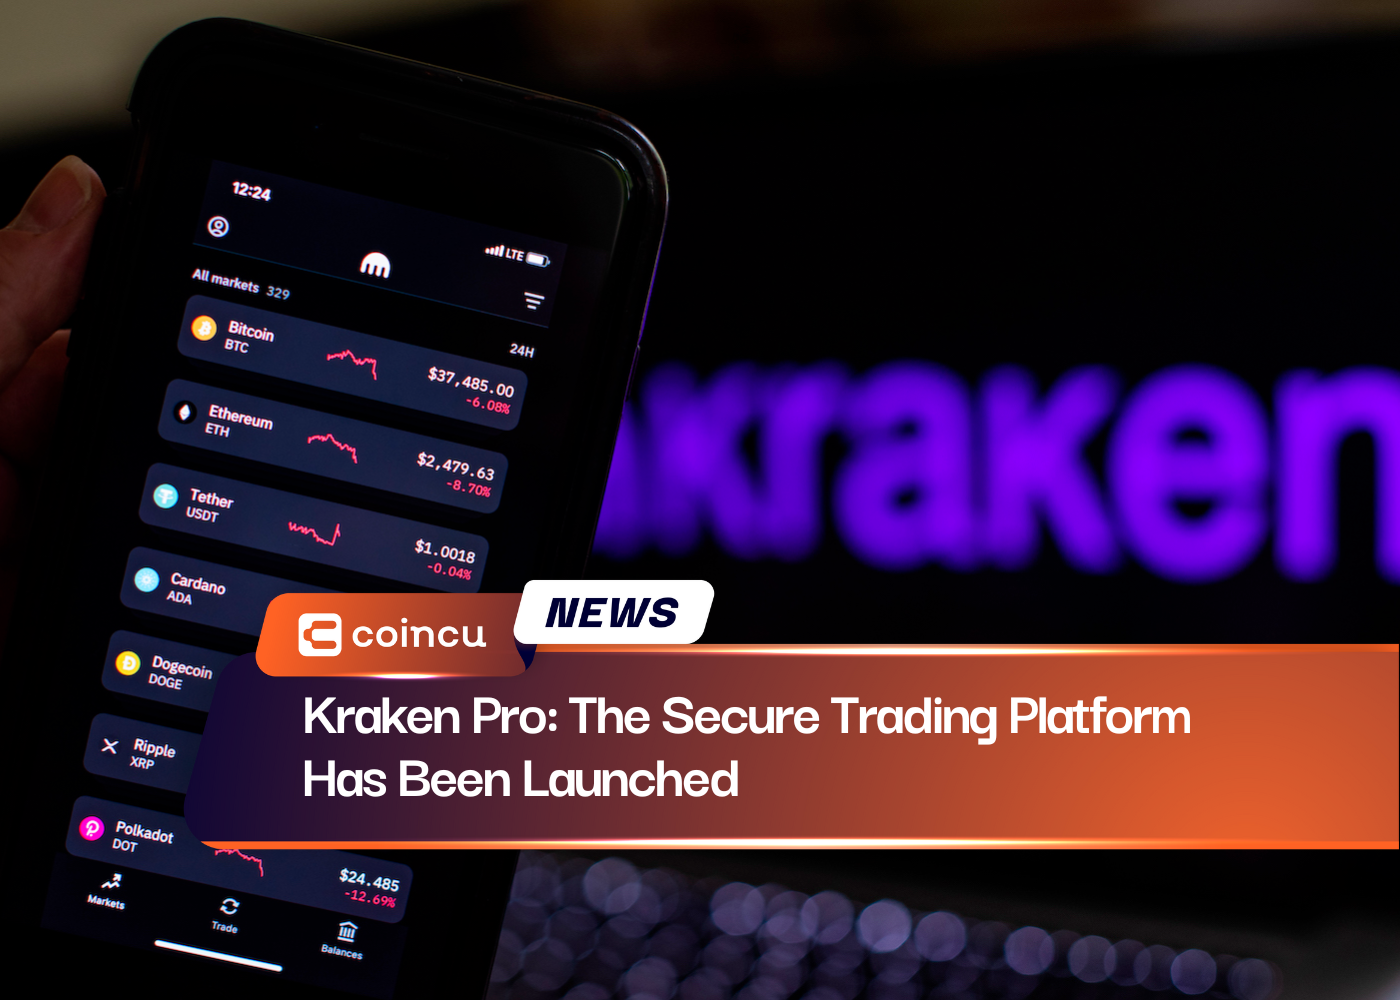 Kraken Pro: The Secure Trading Platform Has Been Launched